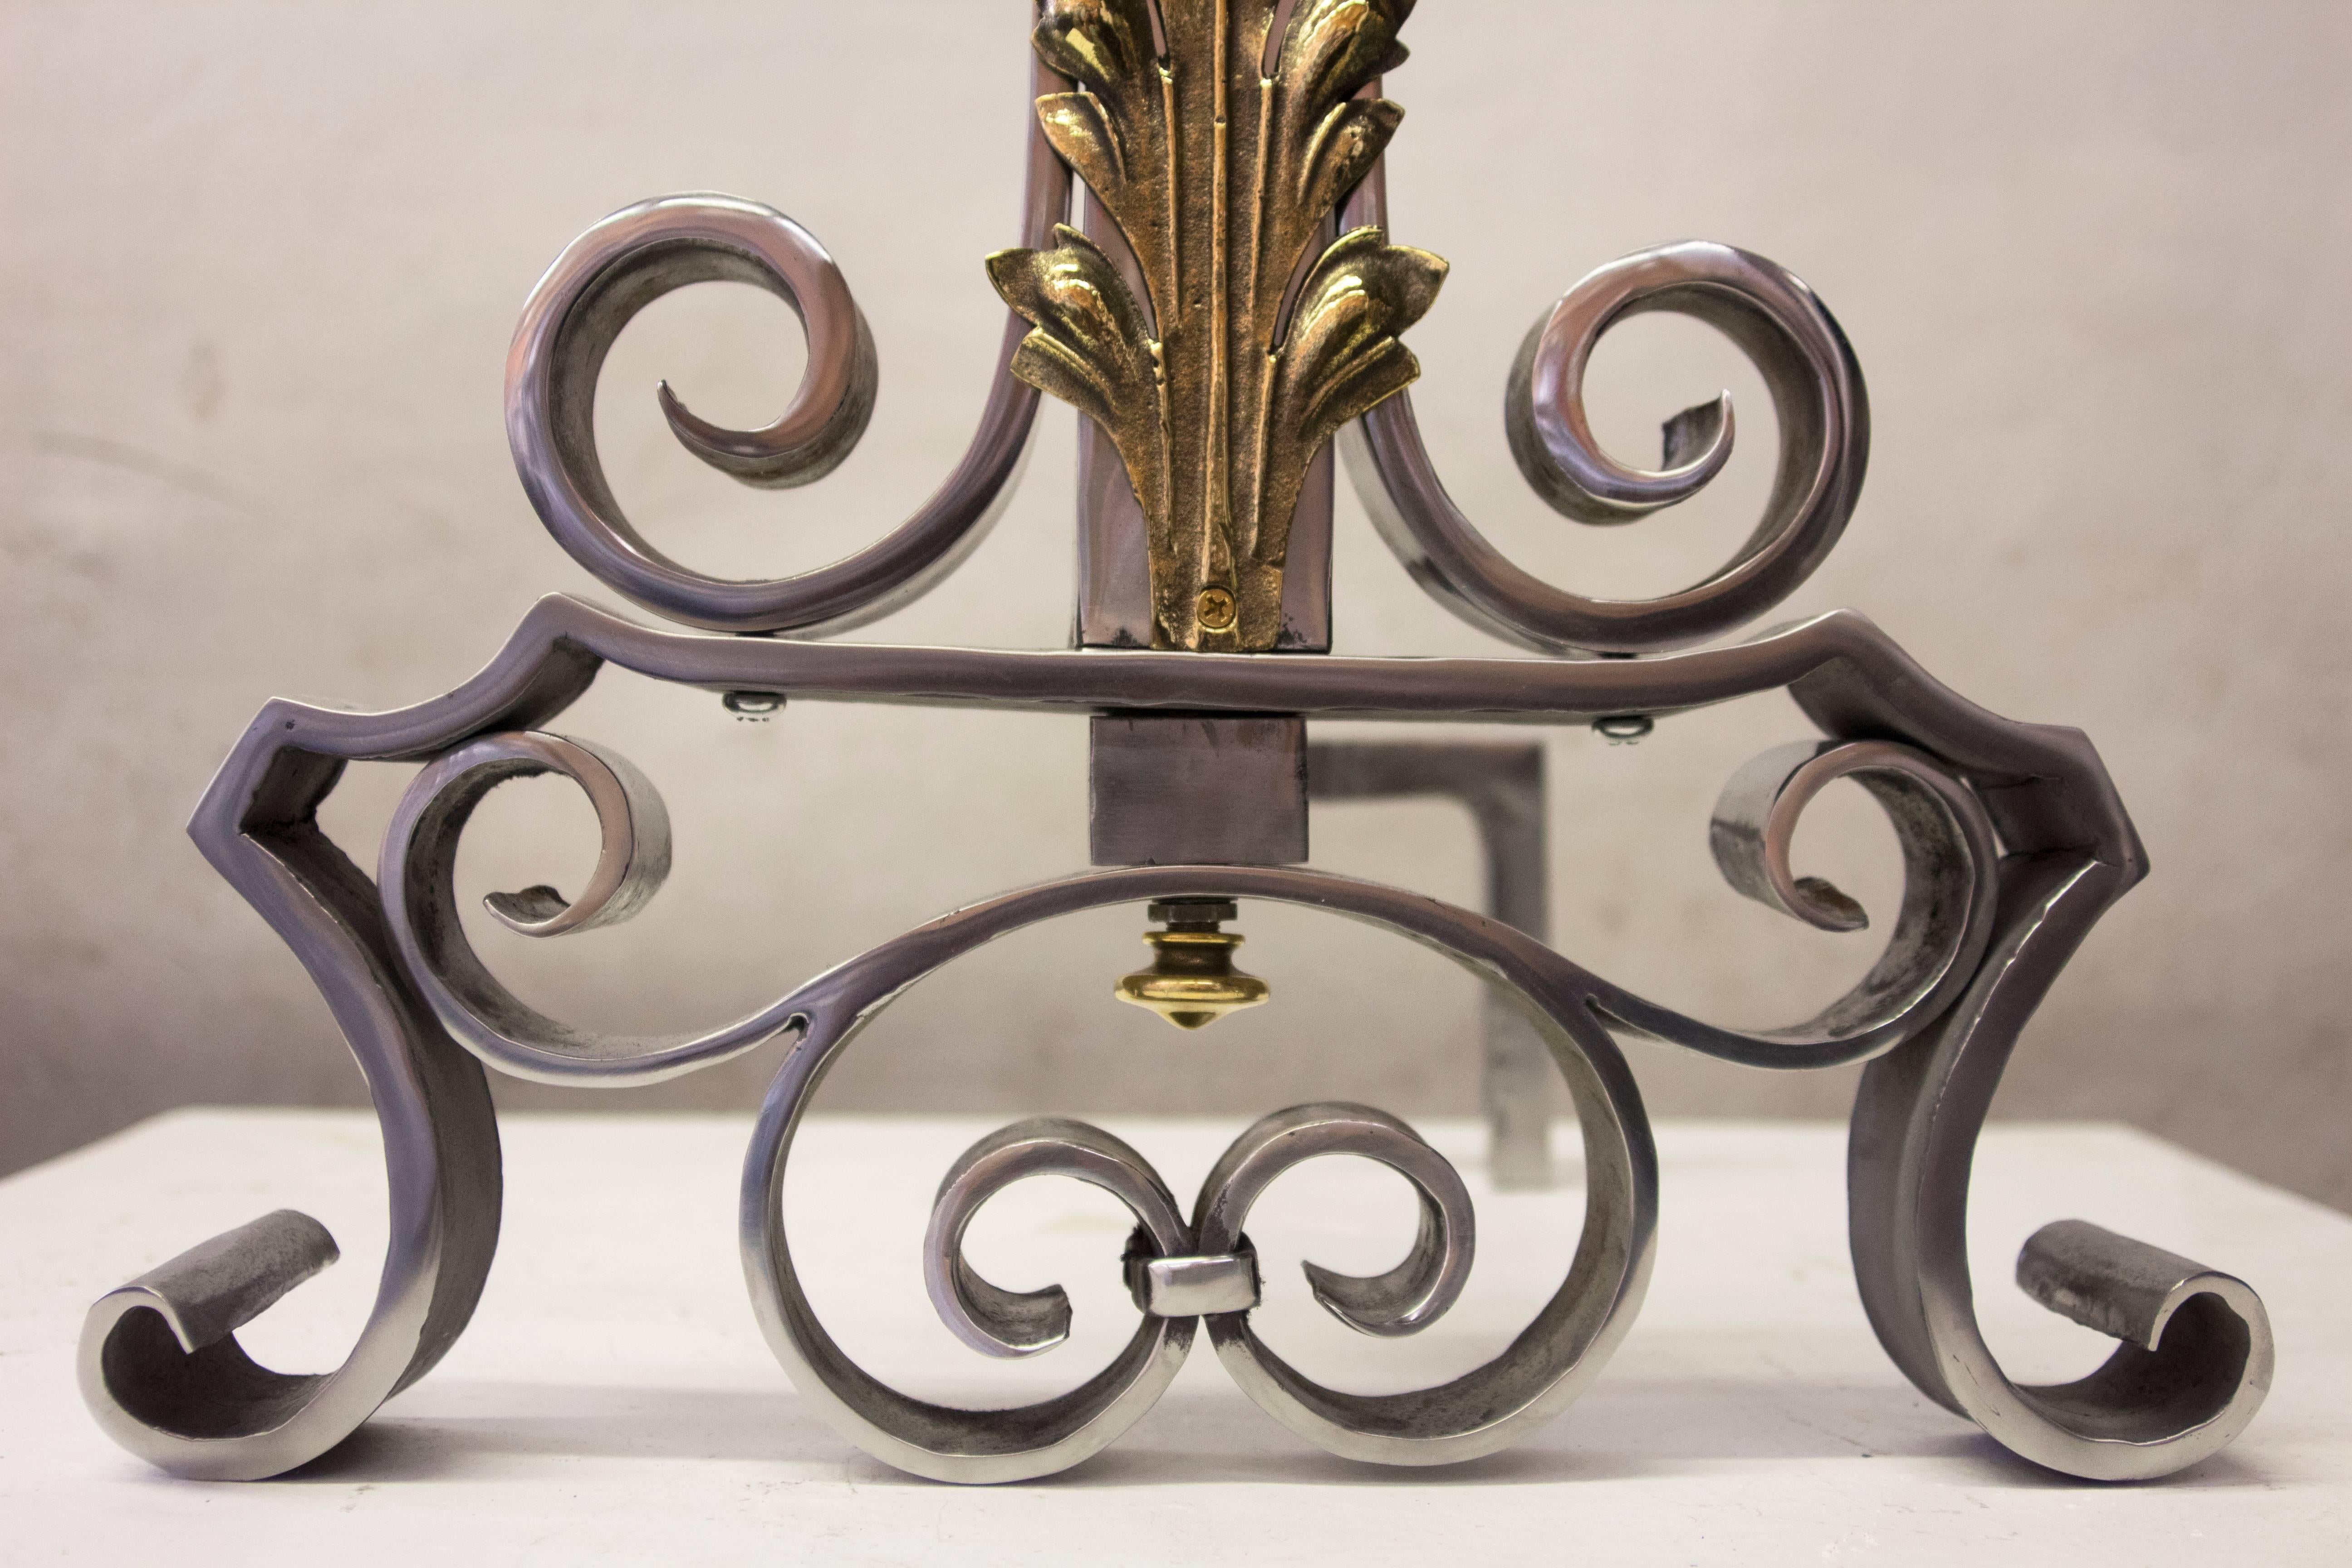 Very high end hand-forged wrought iron pair of andirons with bronze acanthus leaf and brass tassel as a finial.
They have been polished but you can see the traces of the hand work.